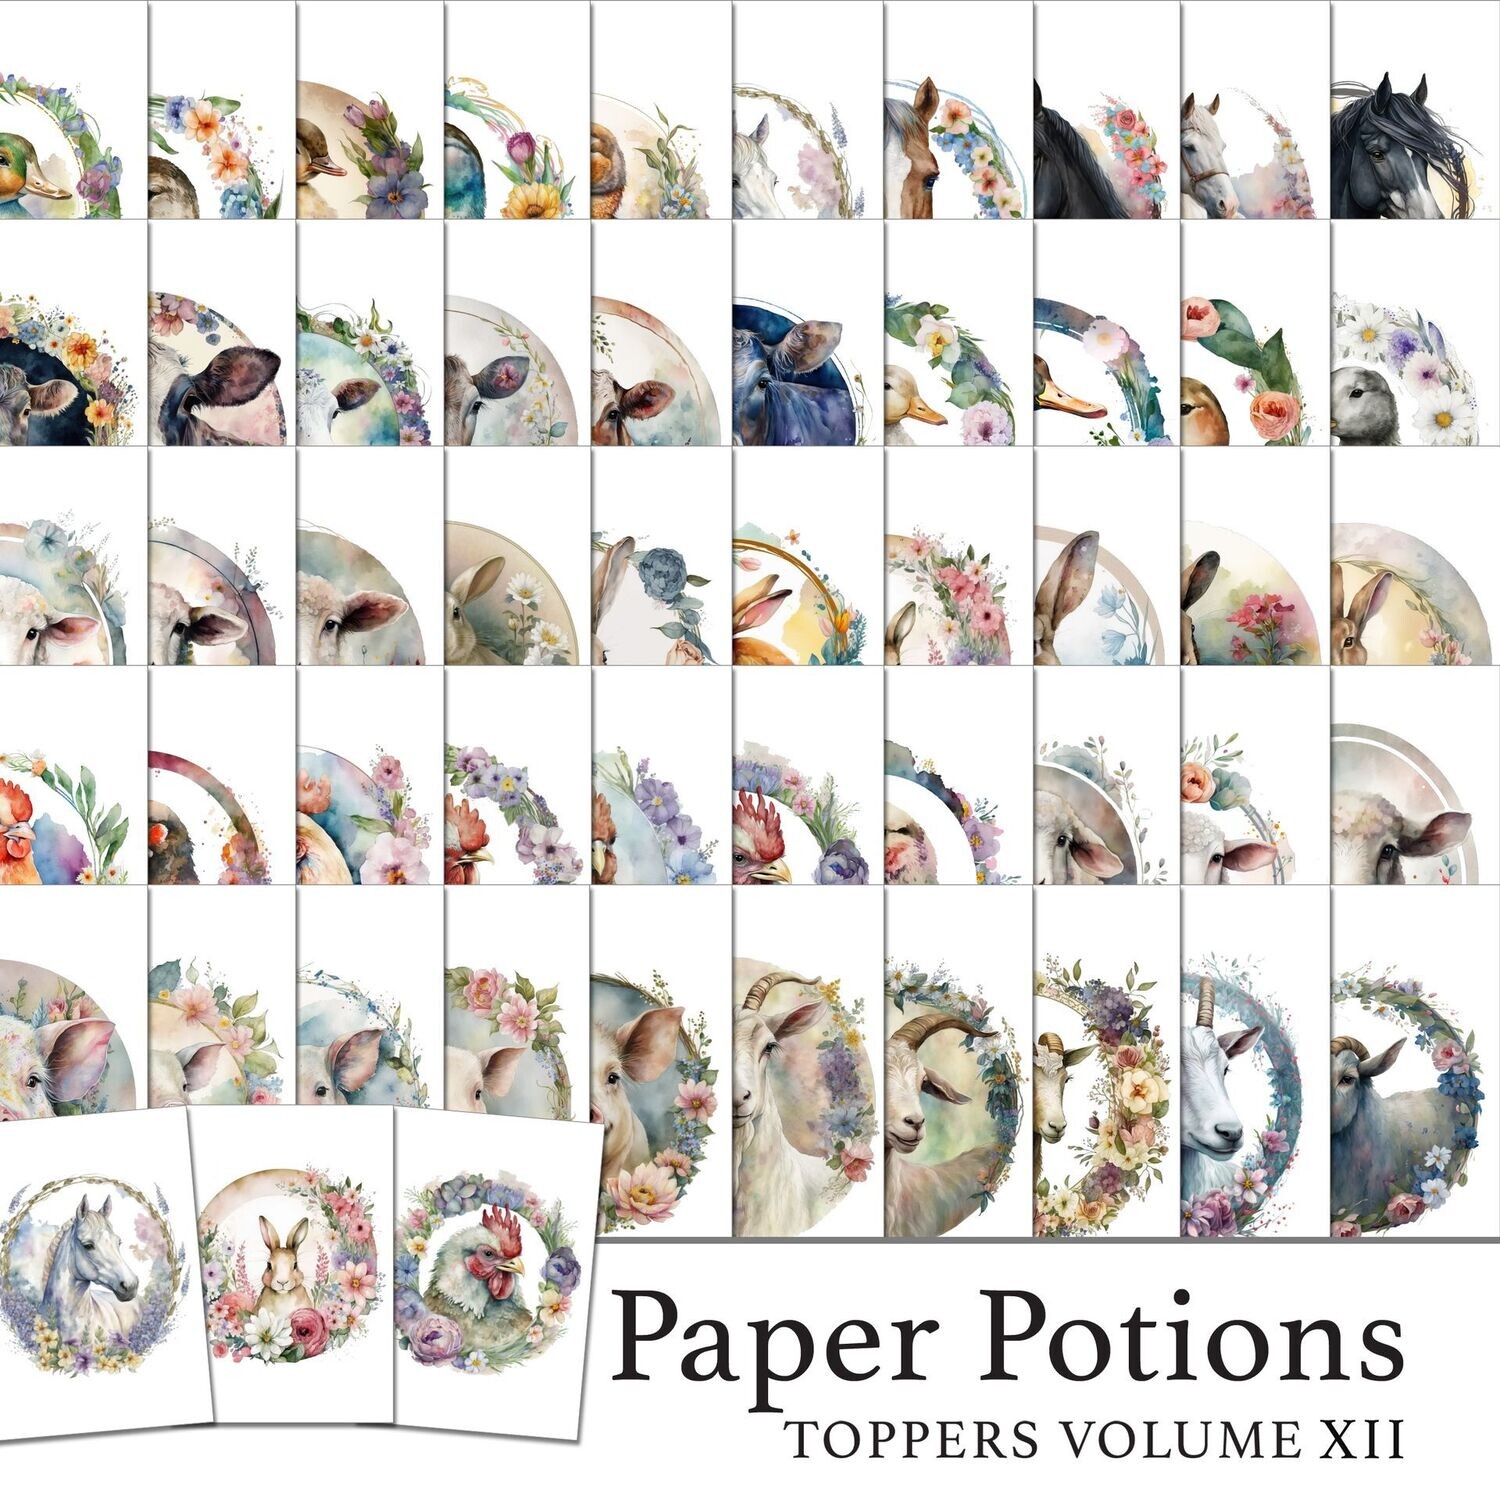 Paper Potions - 100 Toppers Vol XII Digital Kit